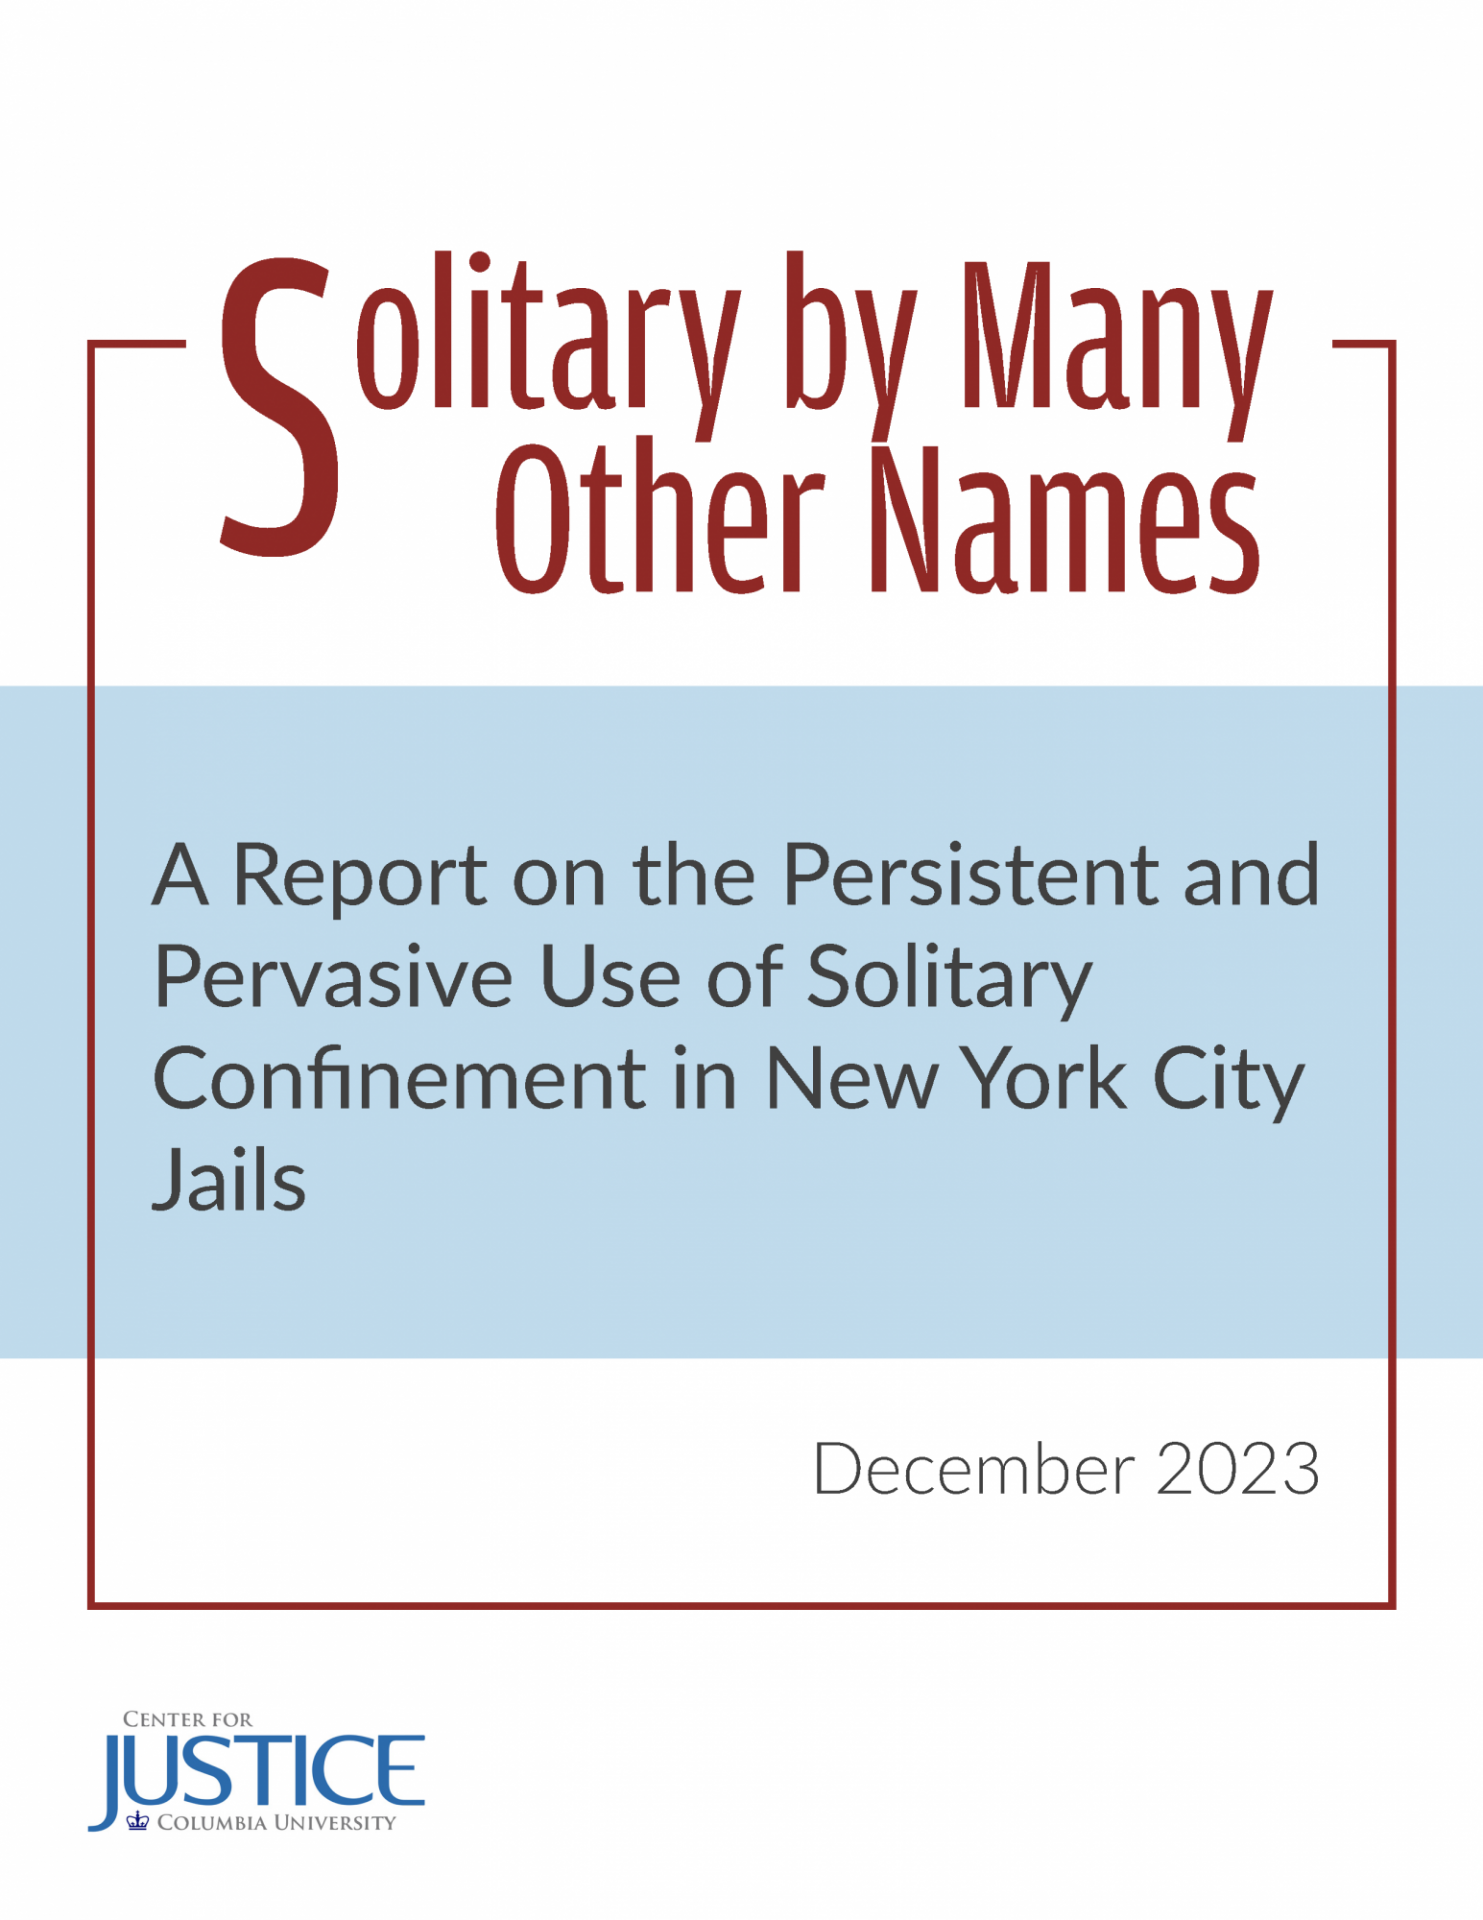 Solitary By Many Other Names: A Report on the Persistent and Pervasive Use of Solitary Confinement in New York City Jails, December 2023